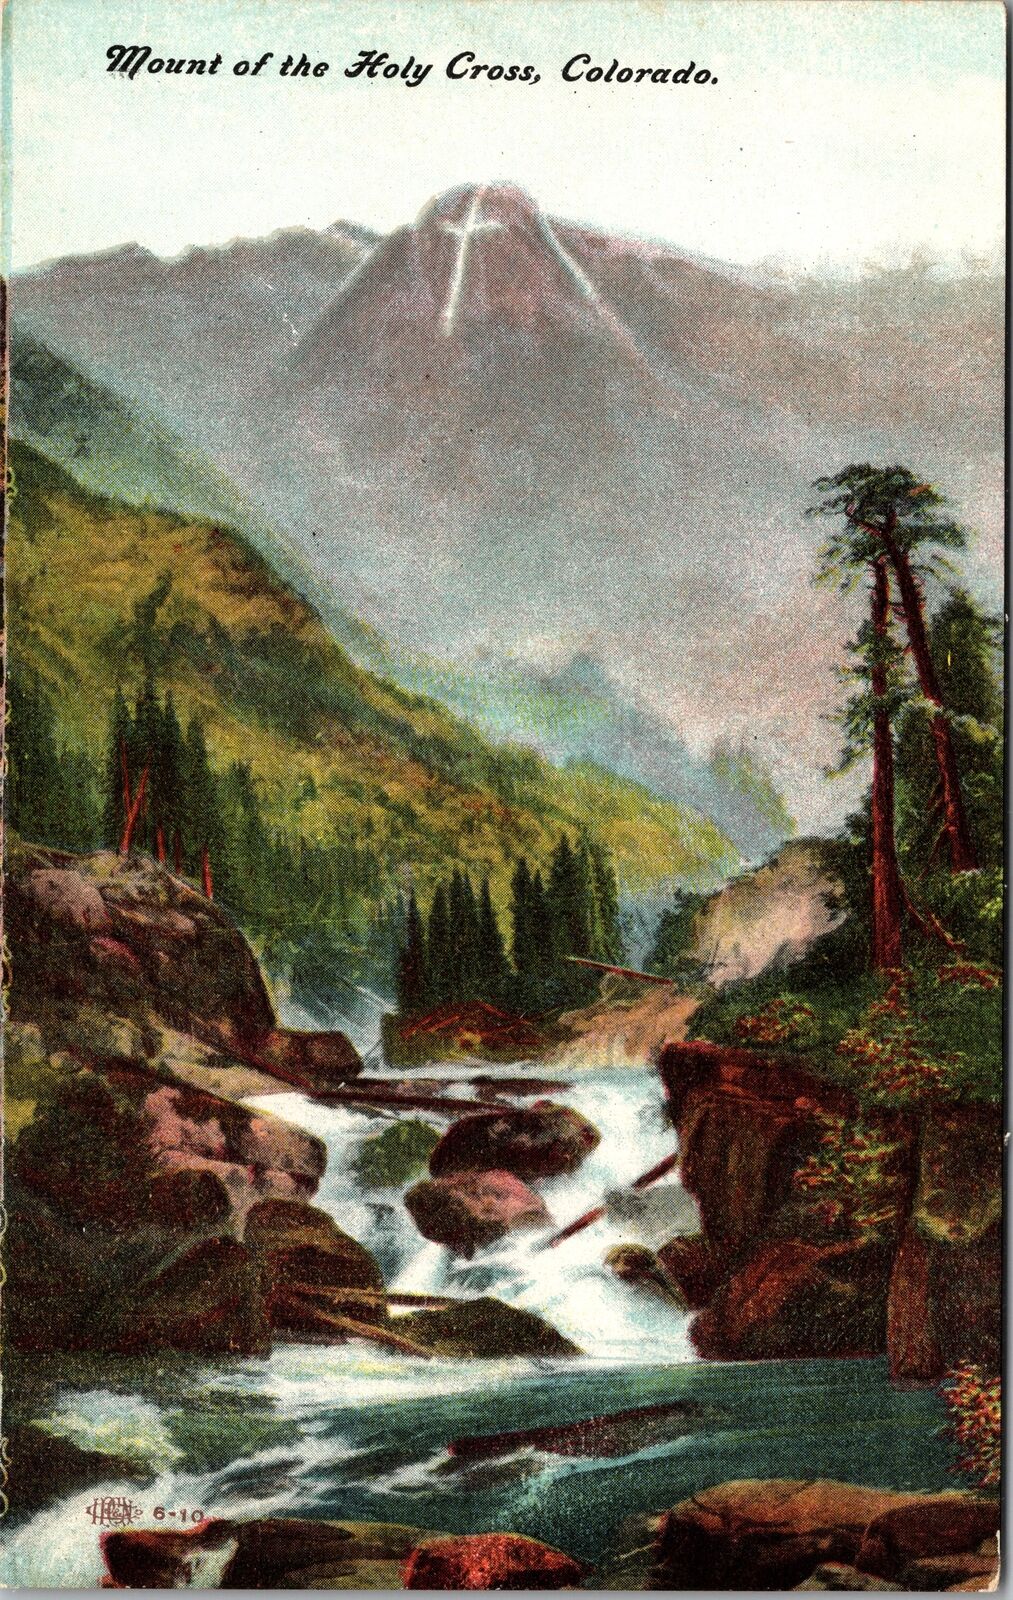 CO-Colorado, Mount the Holy Cross, Scenic River, Vintage Postcard